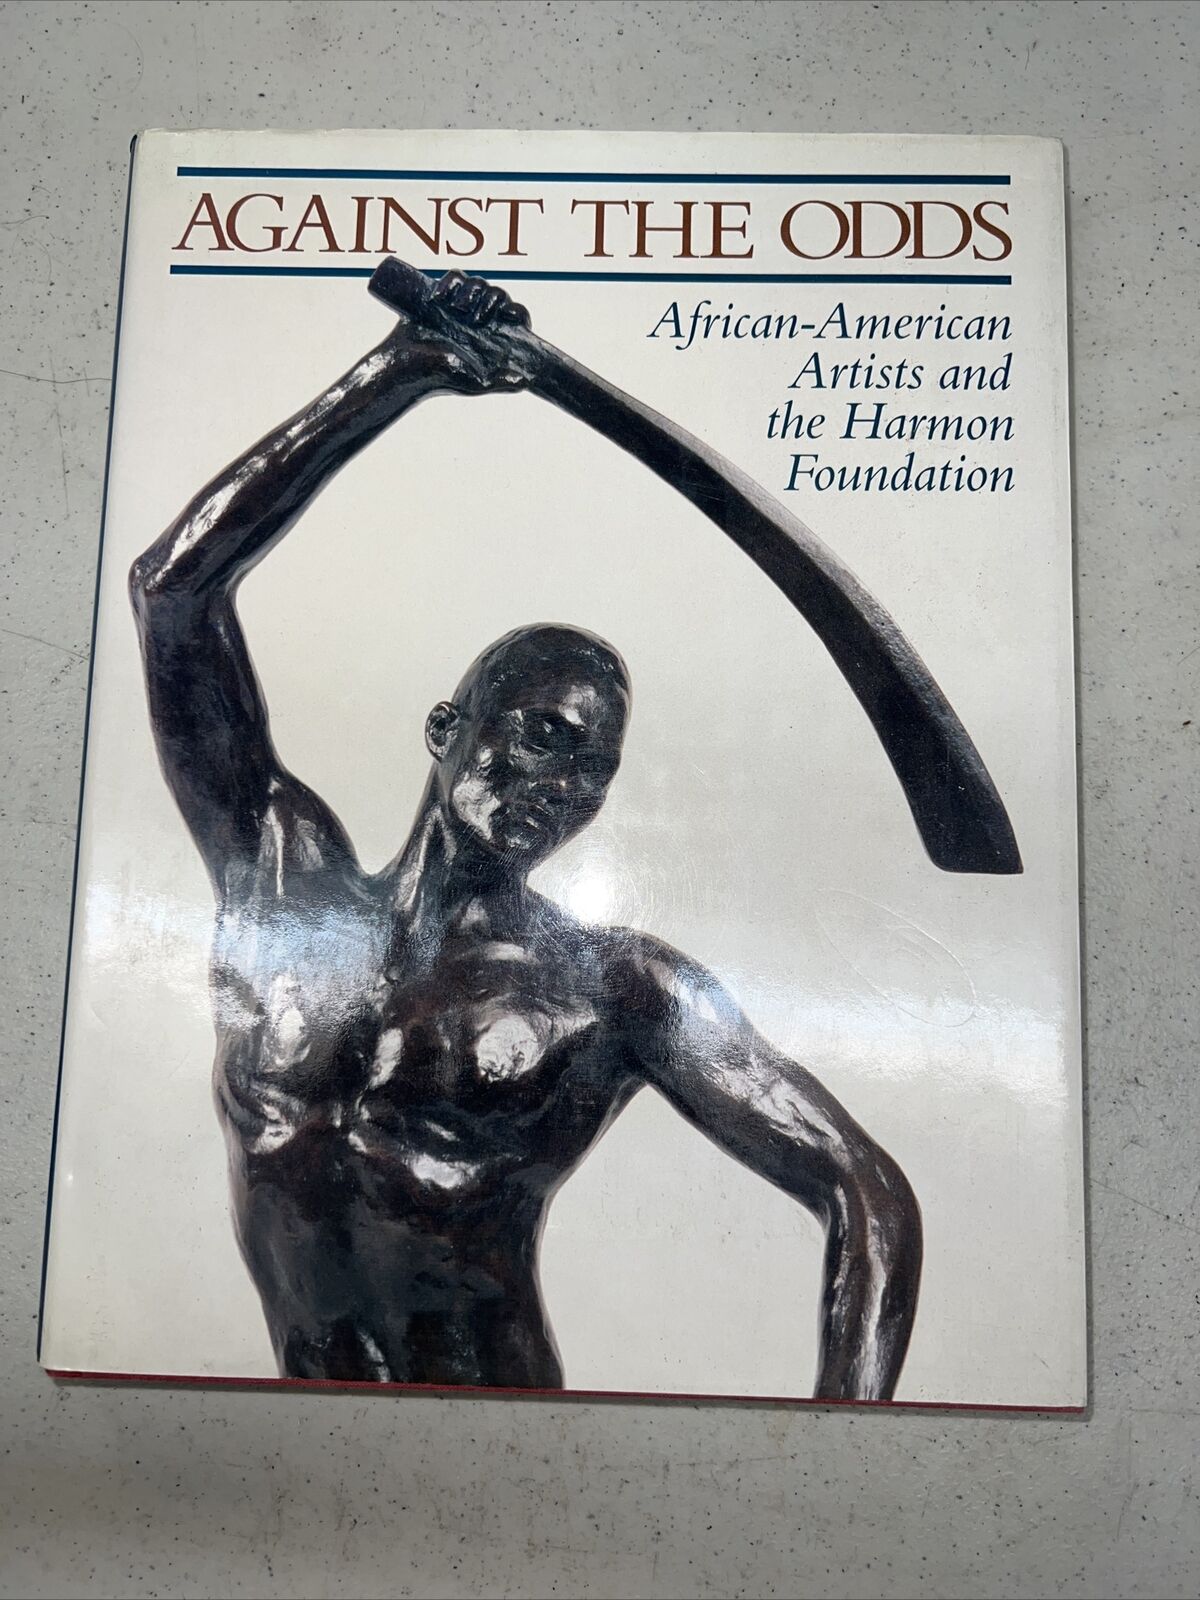 RARE BOOK AGAINST THE ODDS AFRICAN AMERICAN ARTISTS AND THE HARMON FOUNDATION